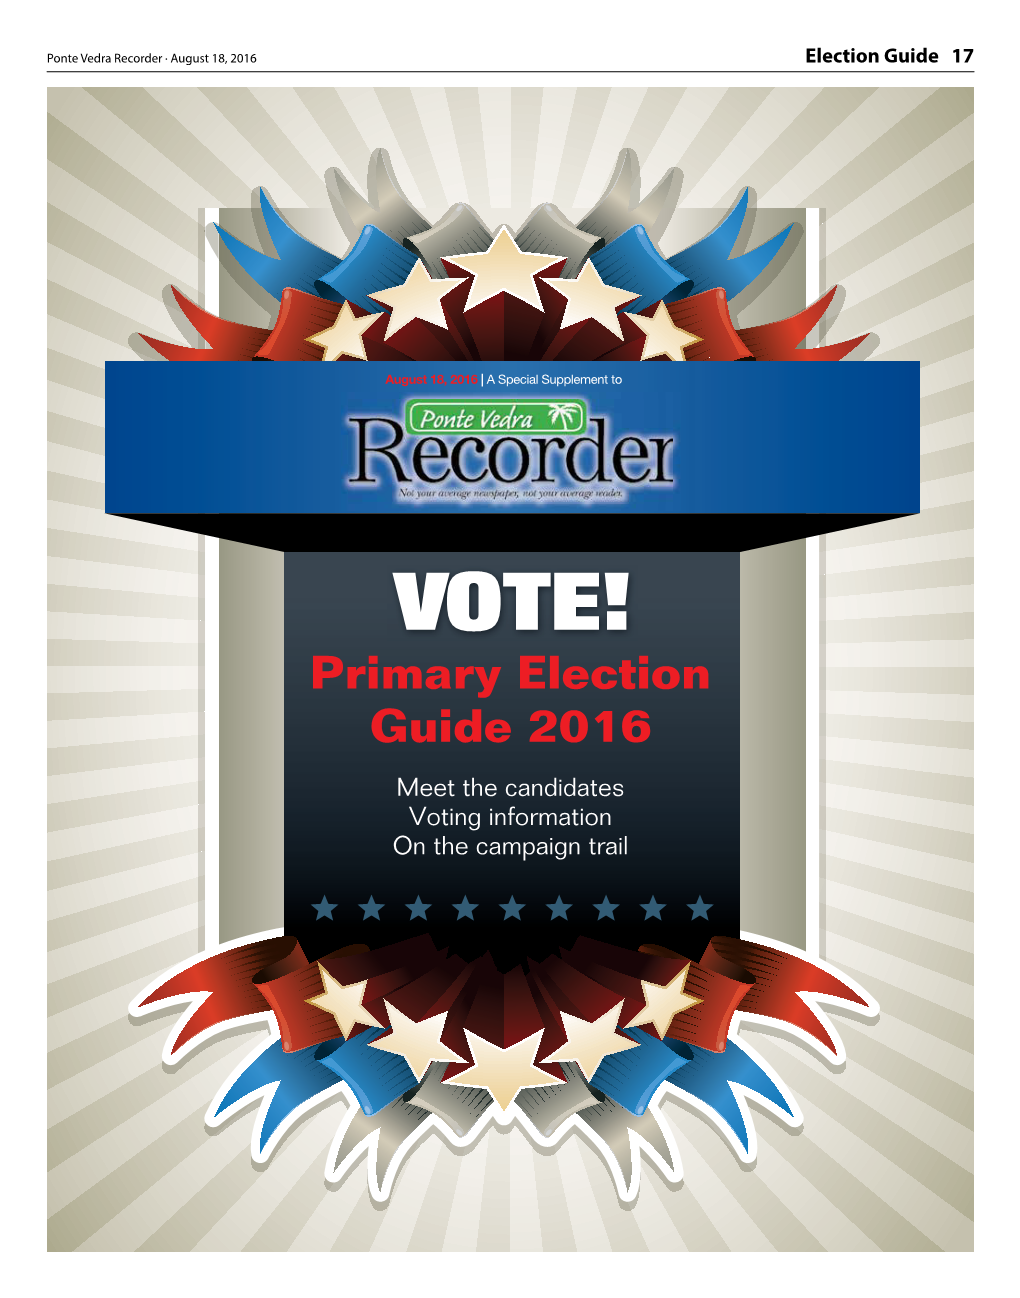 Primary Election Guide 2016